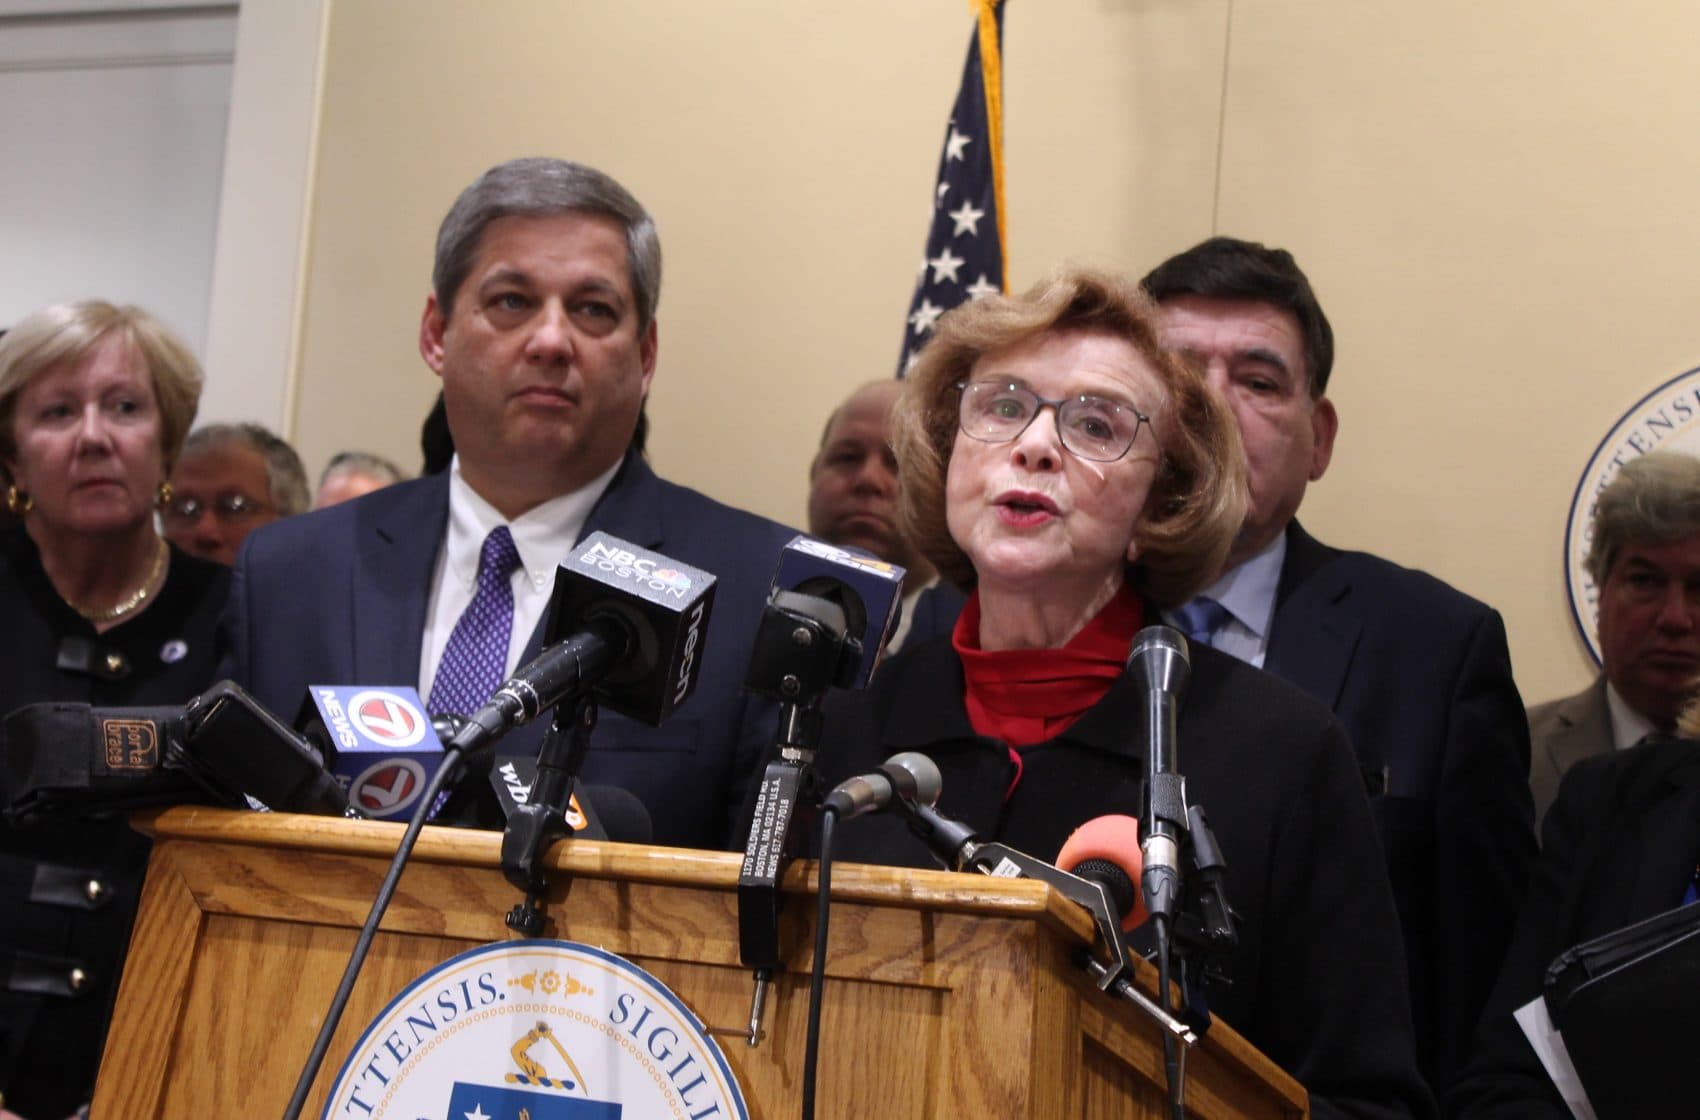 Majority Leader Harriette Chandler and Minority Leader Bruce Tarr talked to the press, backed up by most of their fellow members, following a marathon set of caucuses Monday that determined Chandler would be elected acting Senate president. (Sam Doran/SHNS)